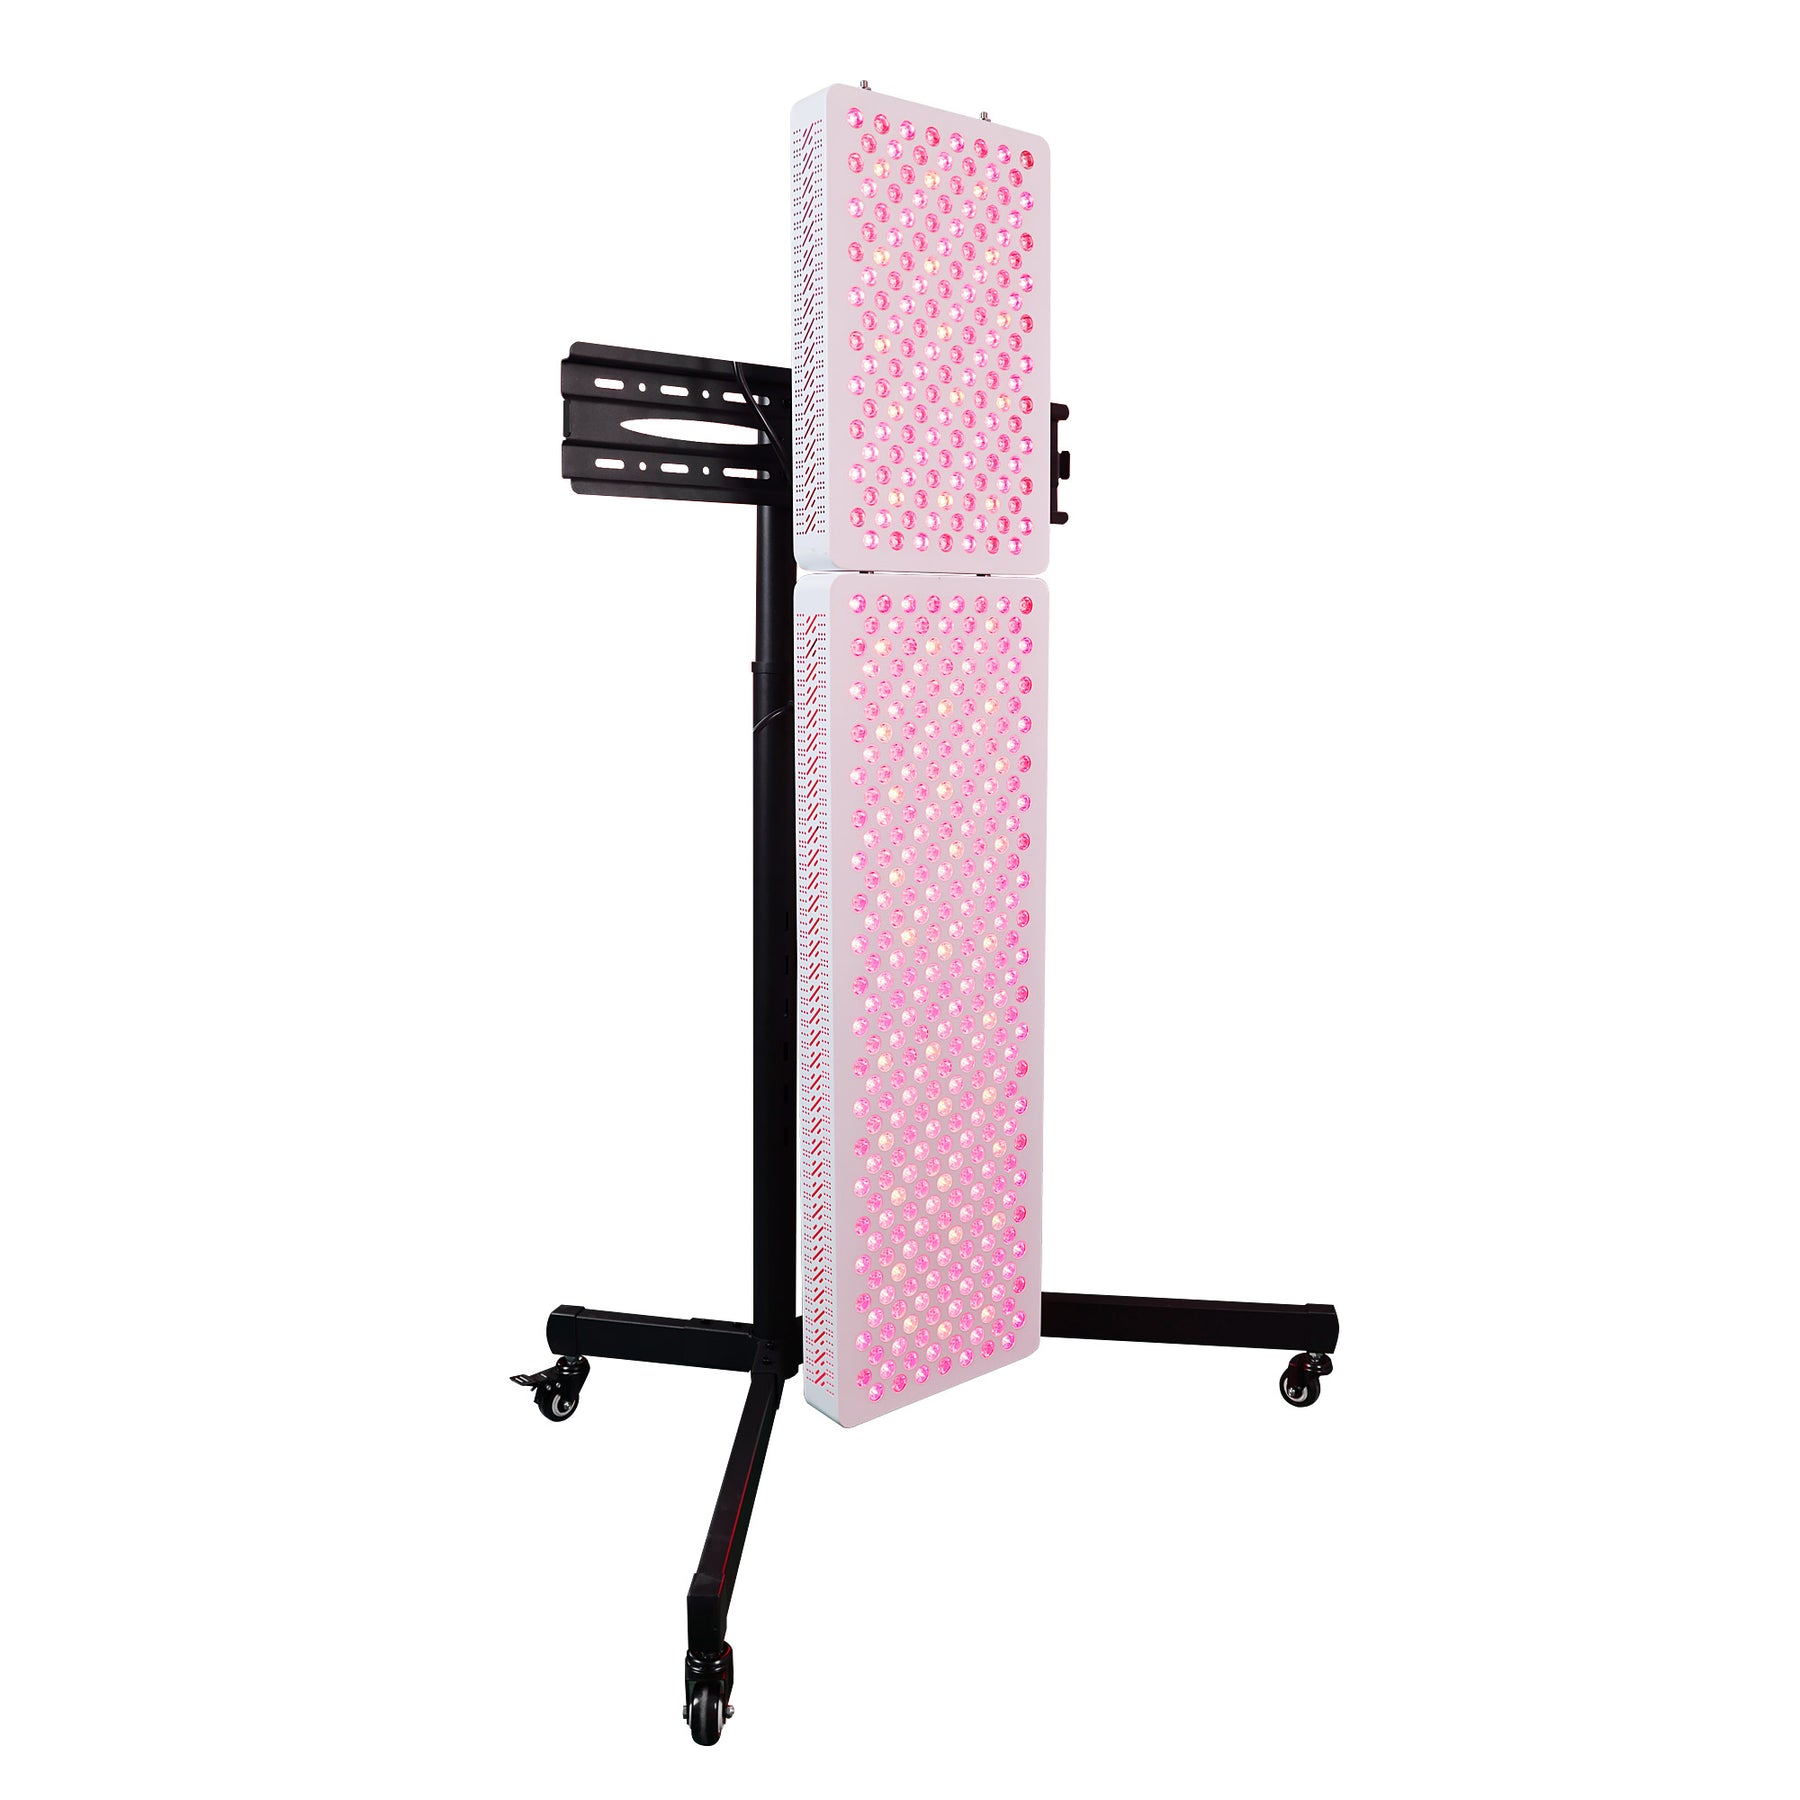 PowerPanel Red Light Therapy Stand